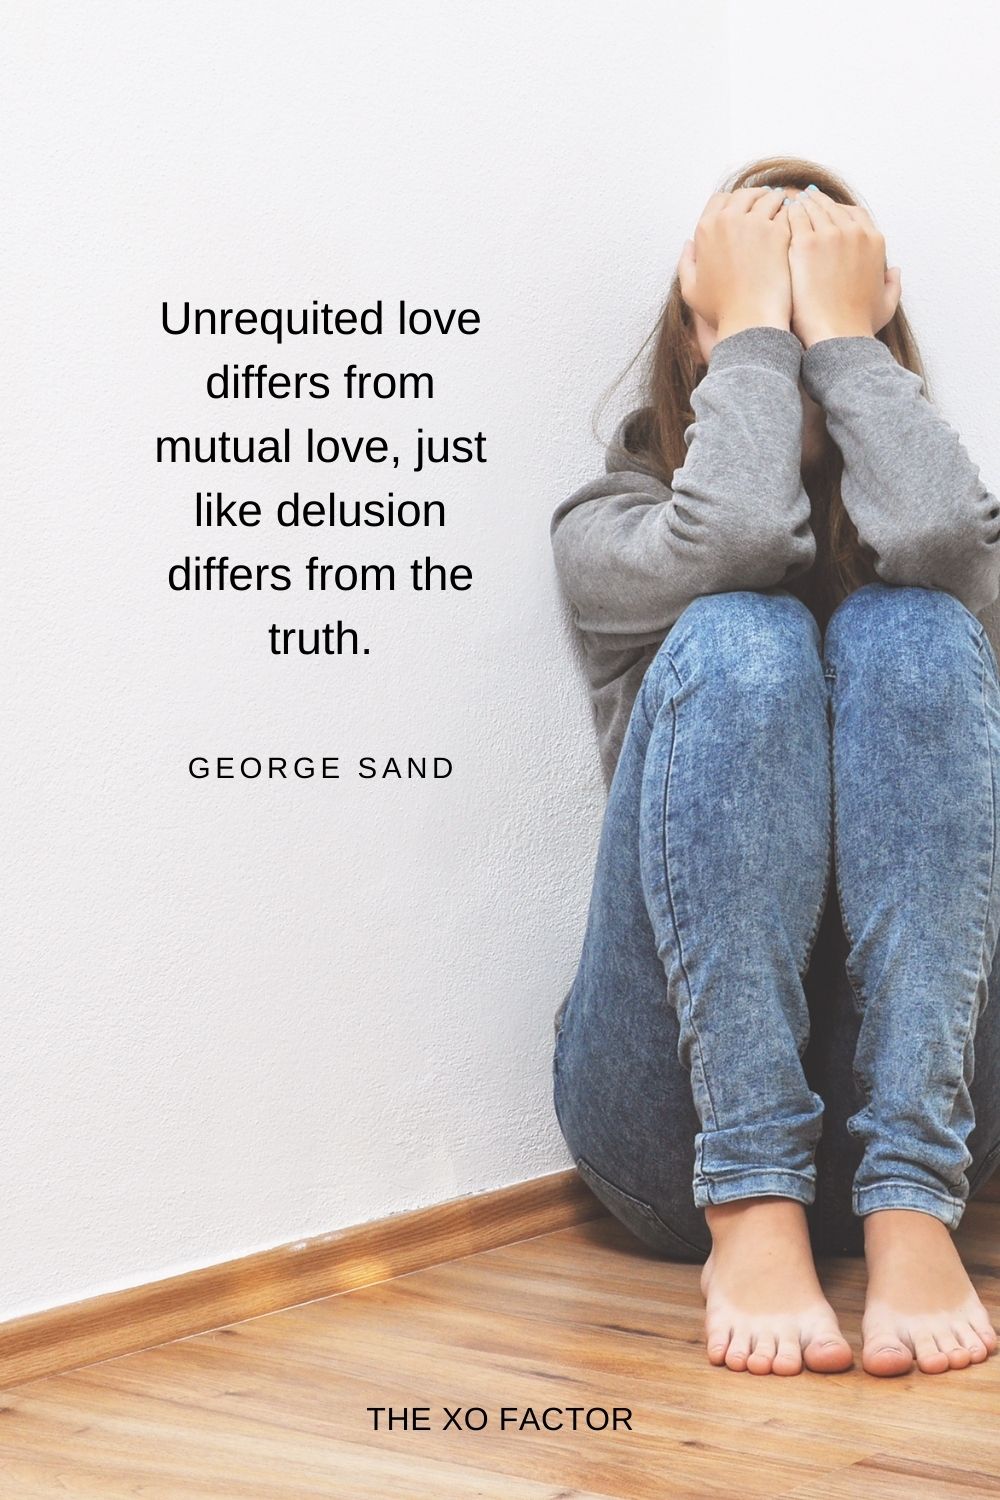 Unrequited love differs from mutual love, just like delusion differs from the truth. George Sand